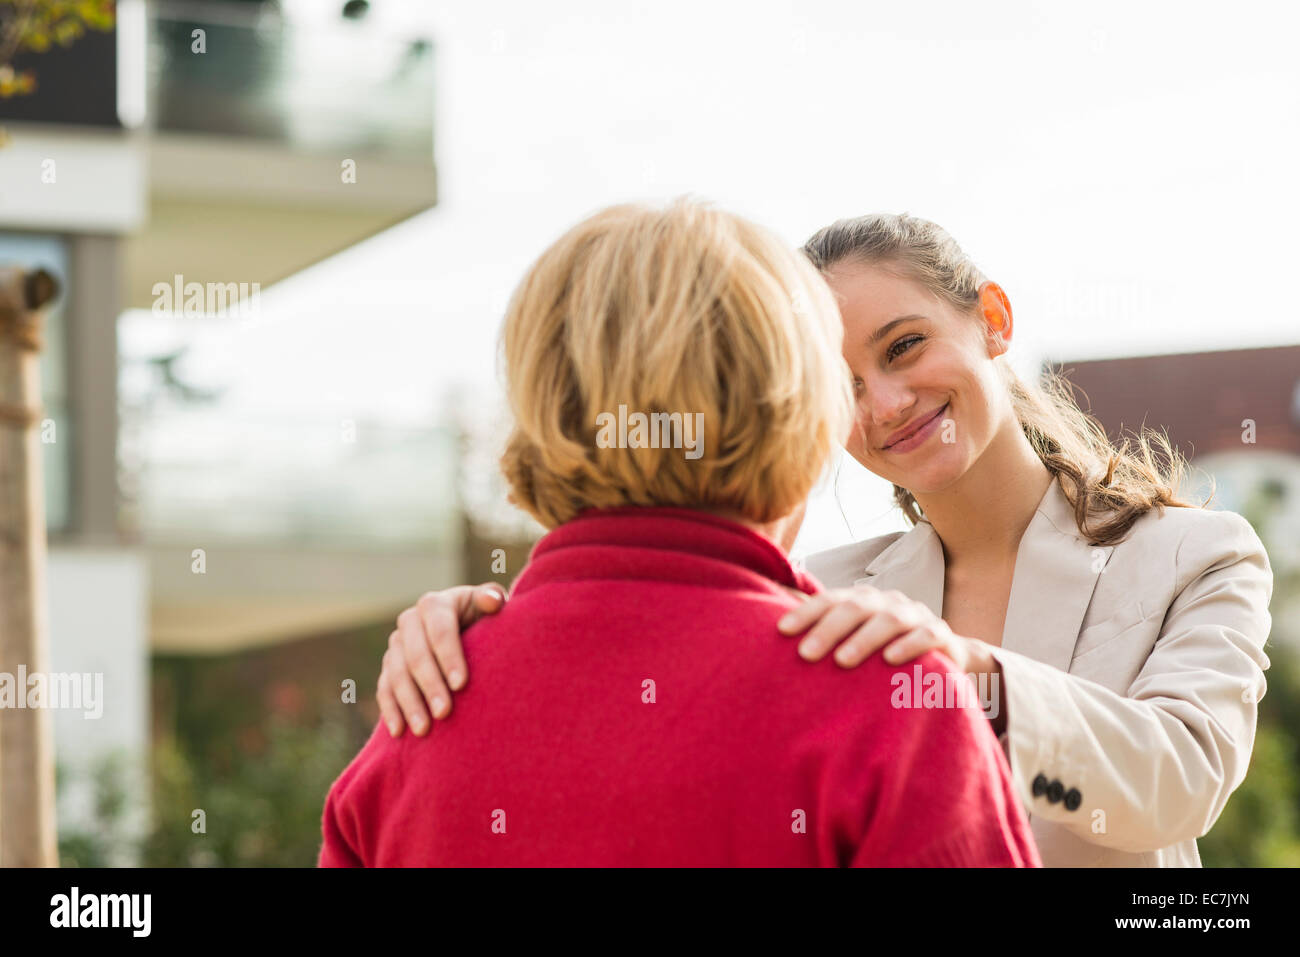 Smiling young woman with hands on shoulders of her grandmother Stock Photo